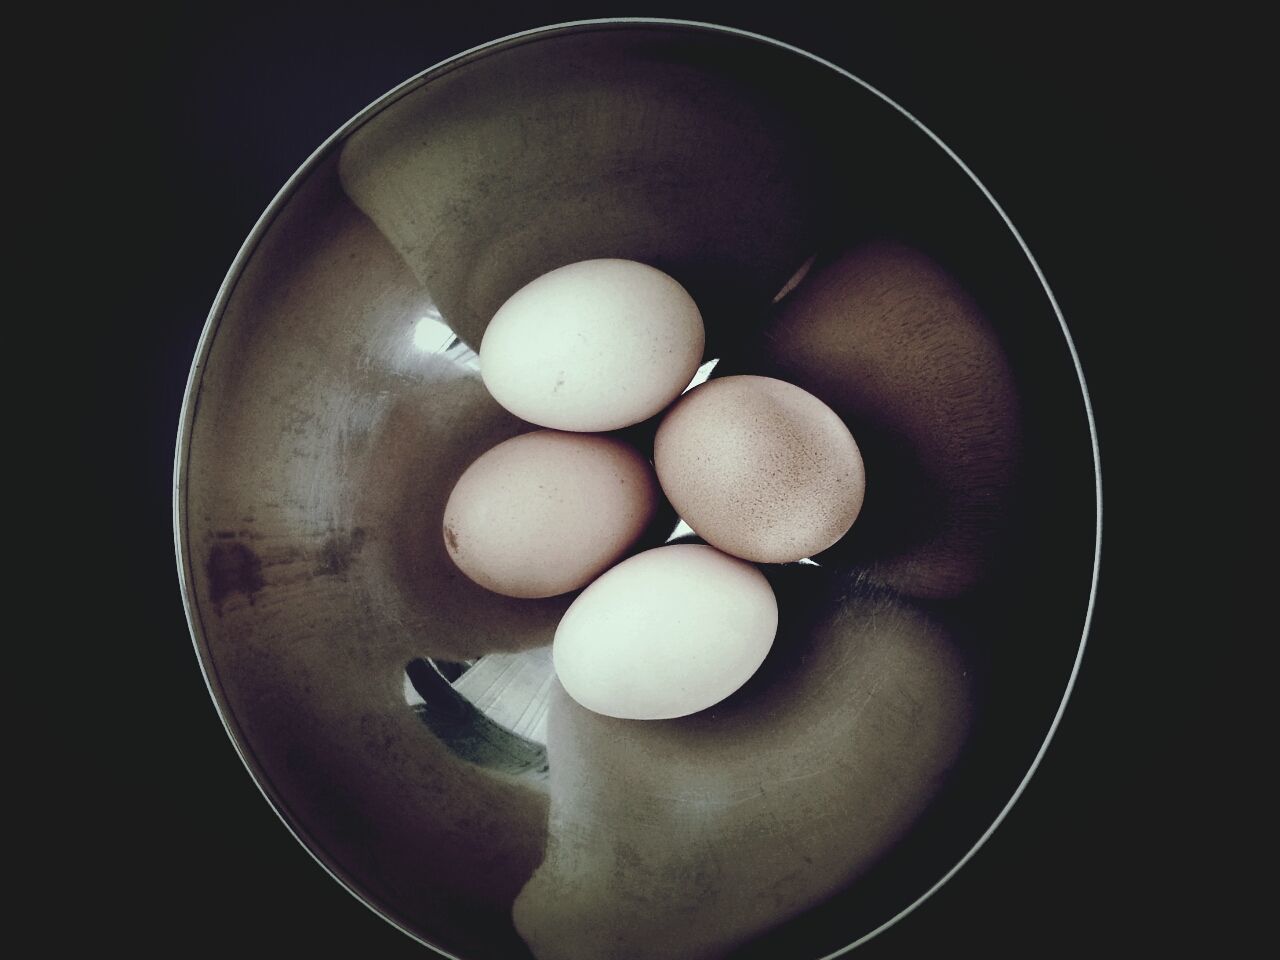 Directly above shot of eggs in bowl